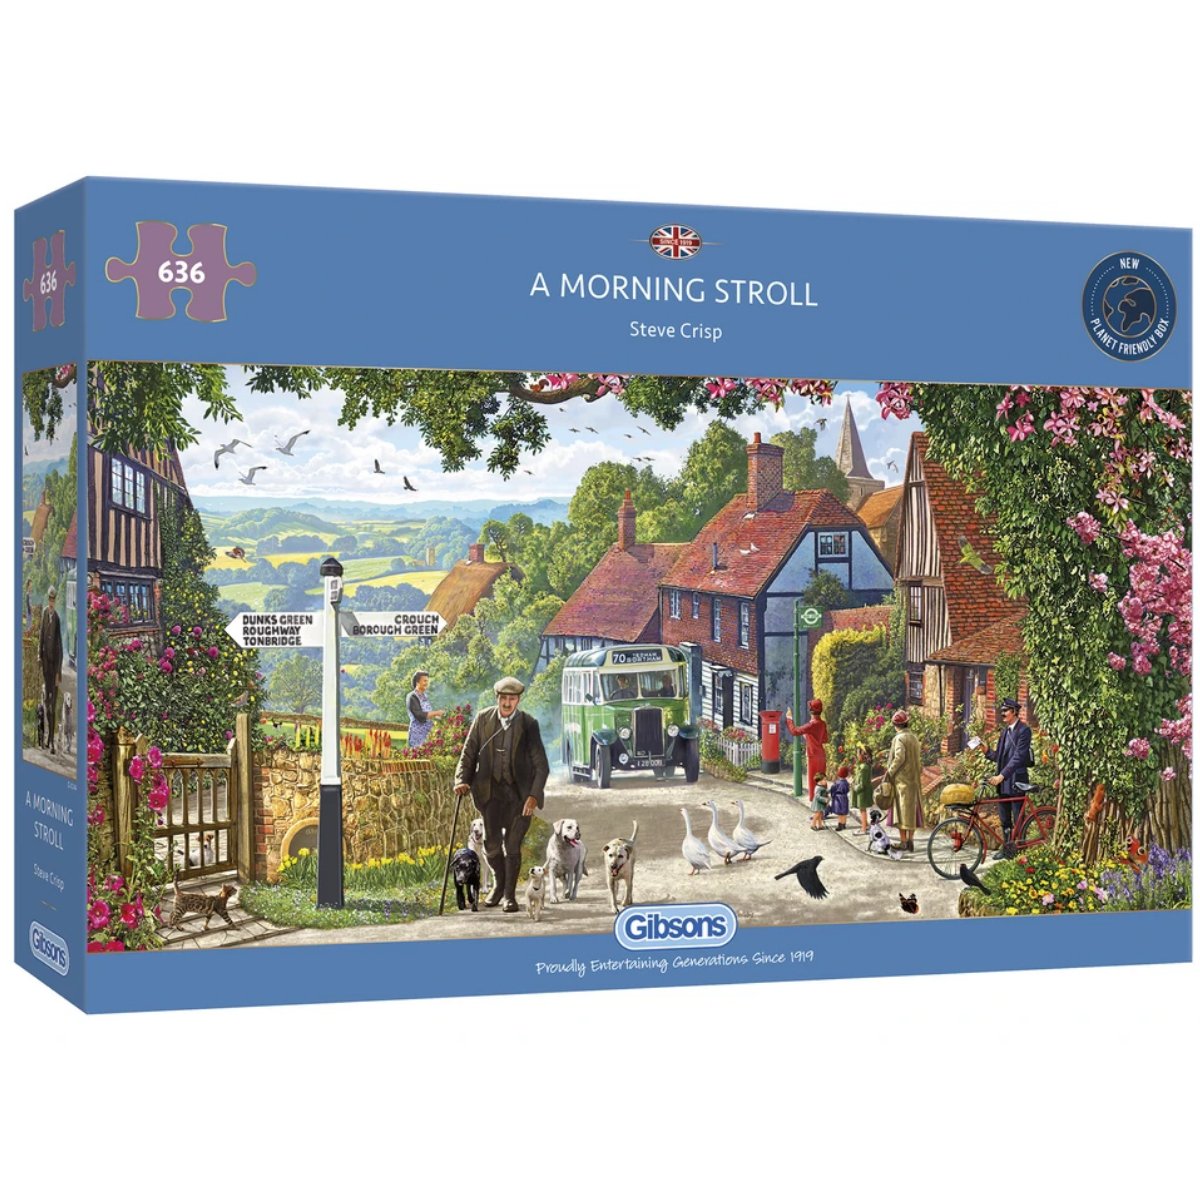 Gibsons A Morning Stroll Jigsaw Puzzle (636 Pieces)